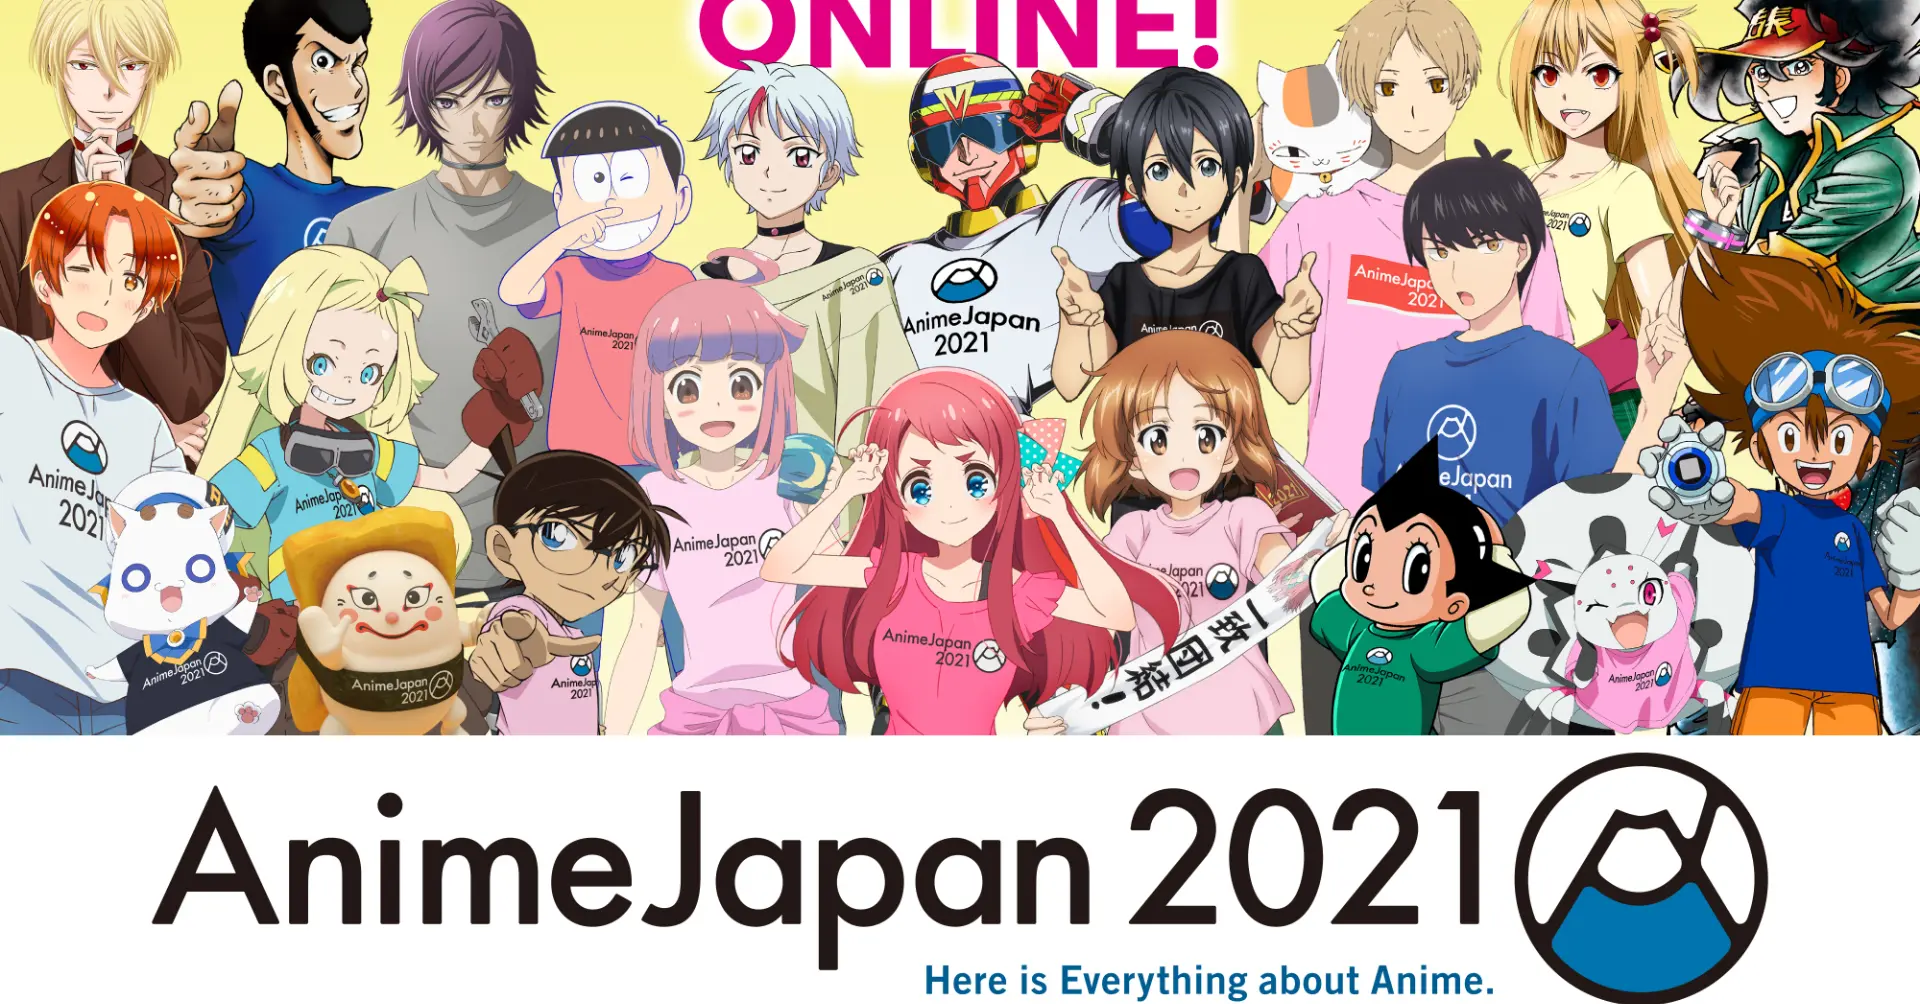 Anime Japan 2021 Will Take Place Online, Will Include an English Channel  for Overseas Fans - Anime Corner